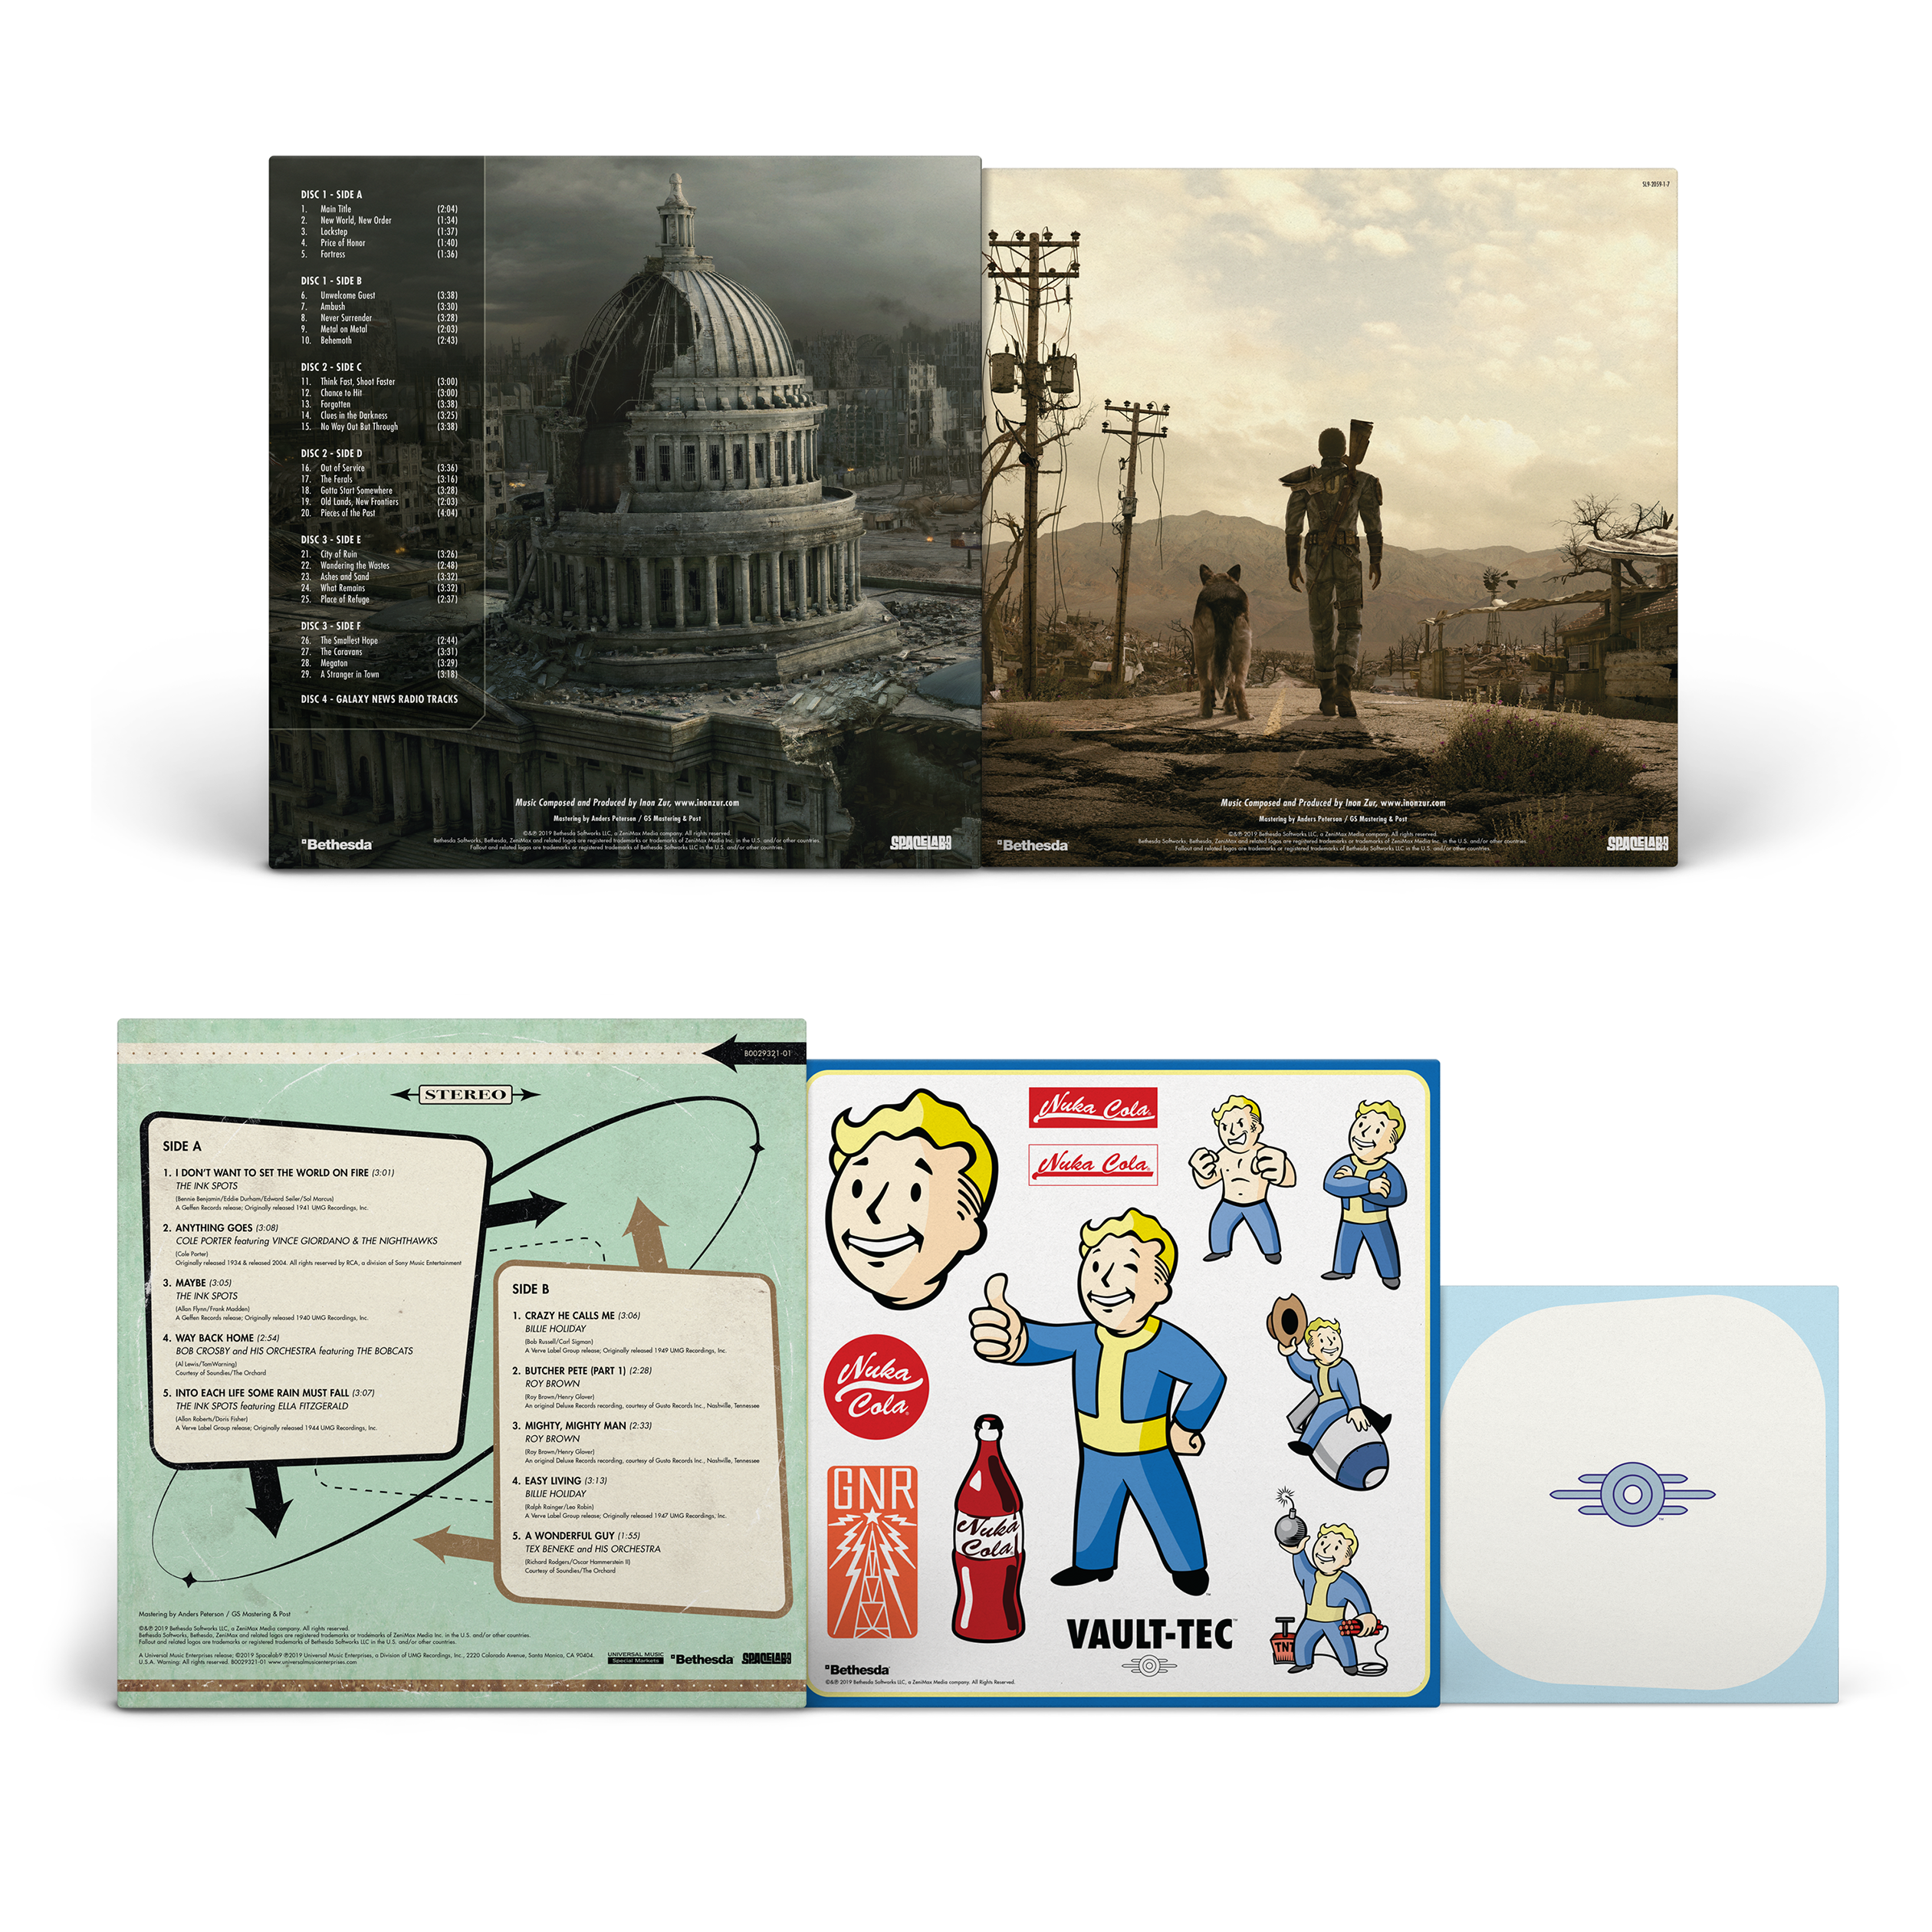 FALLOUT 3: 10th Anniversary Ultimate Vinyl Edition 4LP Box Set [Exclus